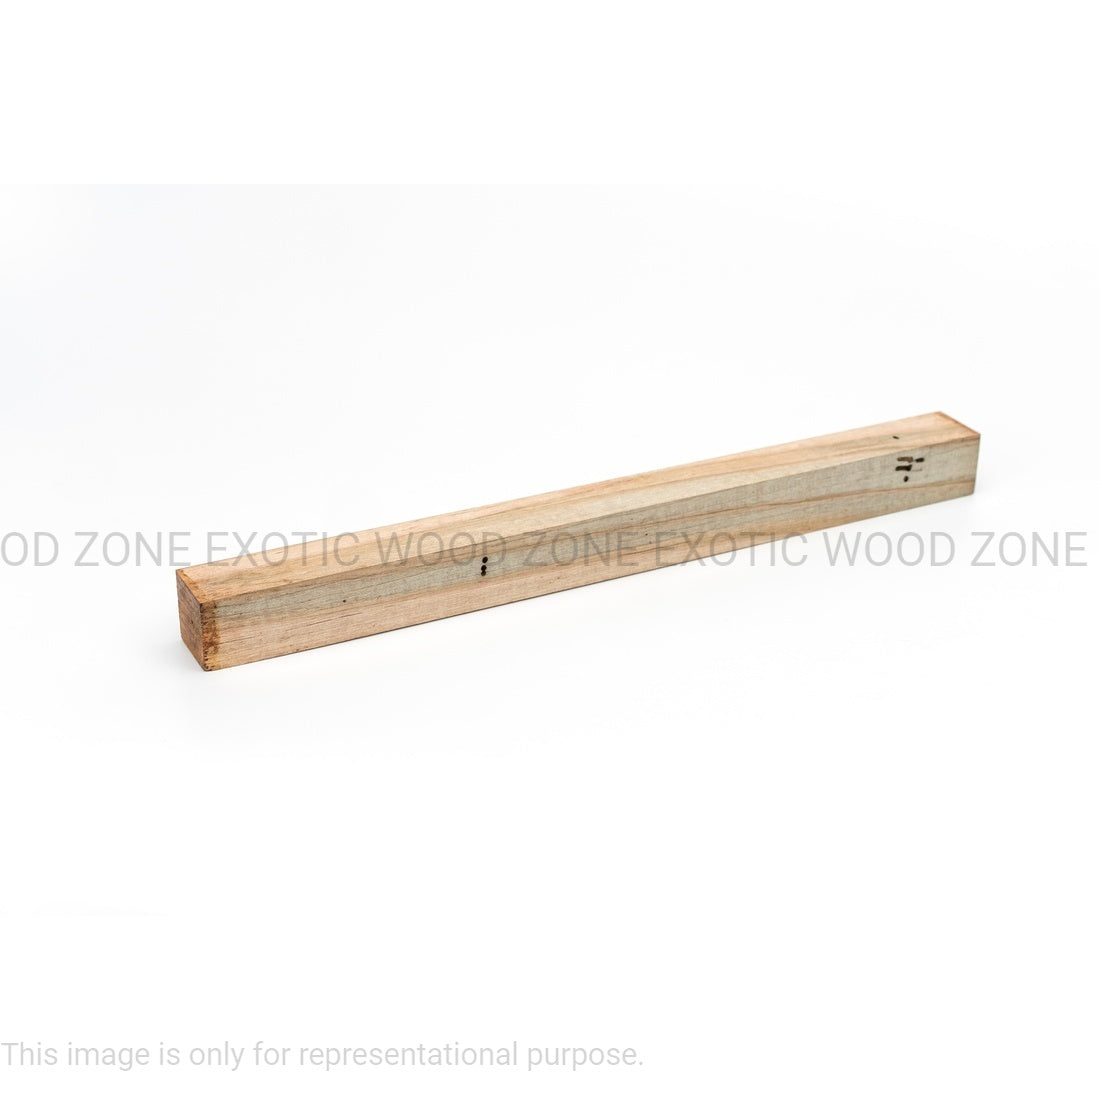 Ambrosia Maple Hobbywood Blank 1&quot; x 1 &quot; x 12&quot; inches Exotic Wood Zone